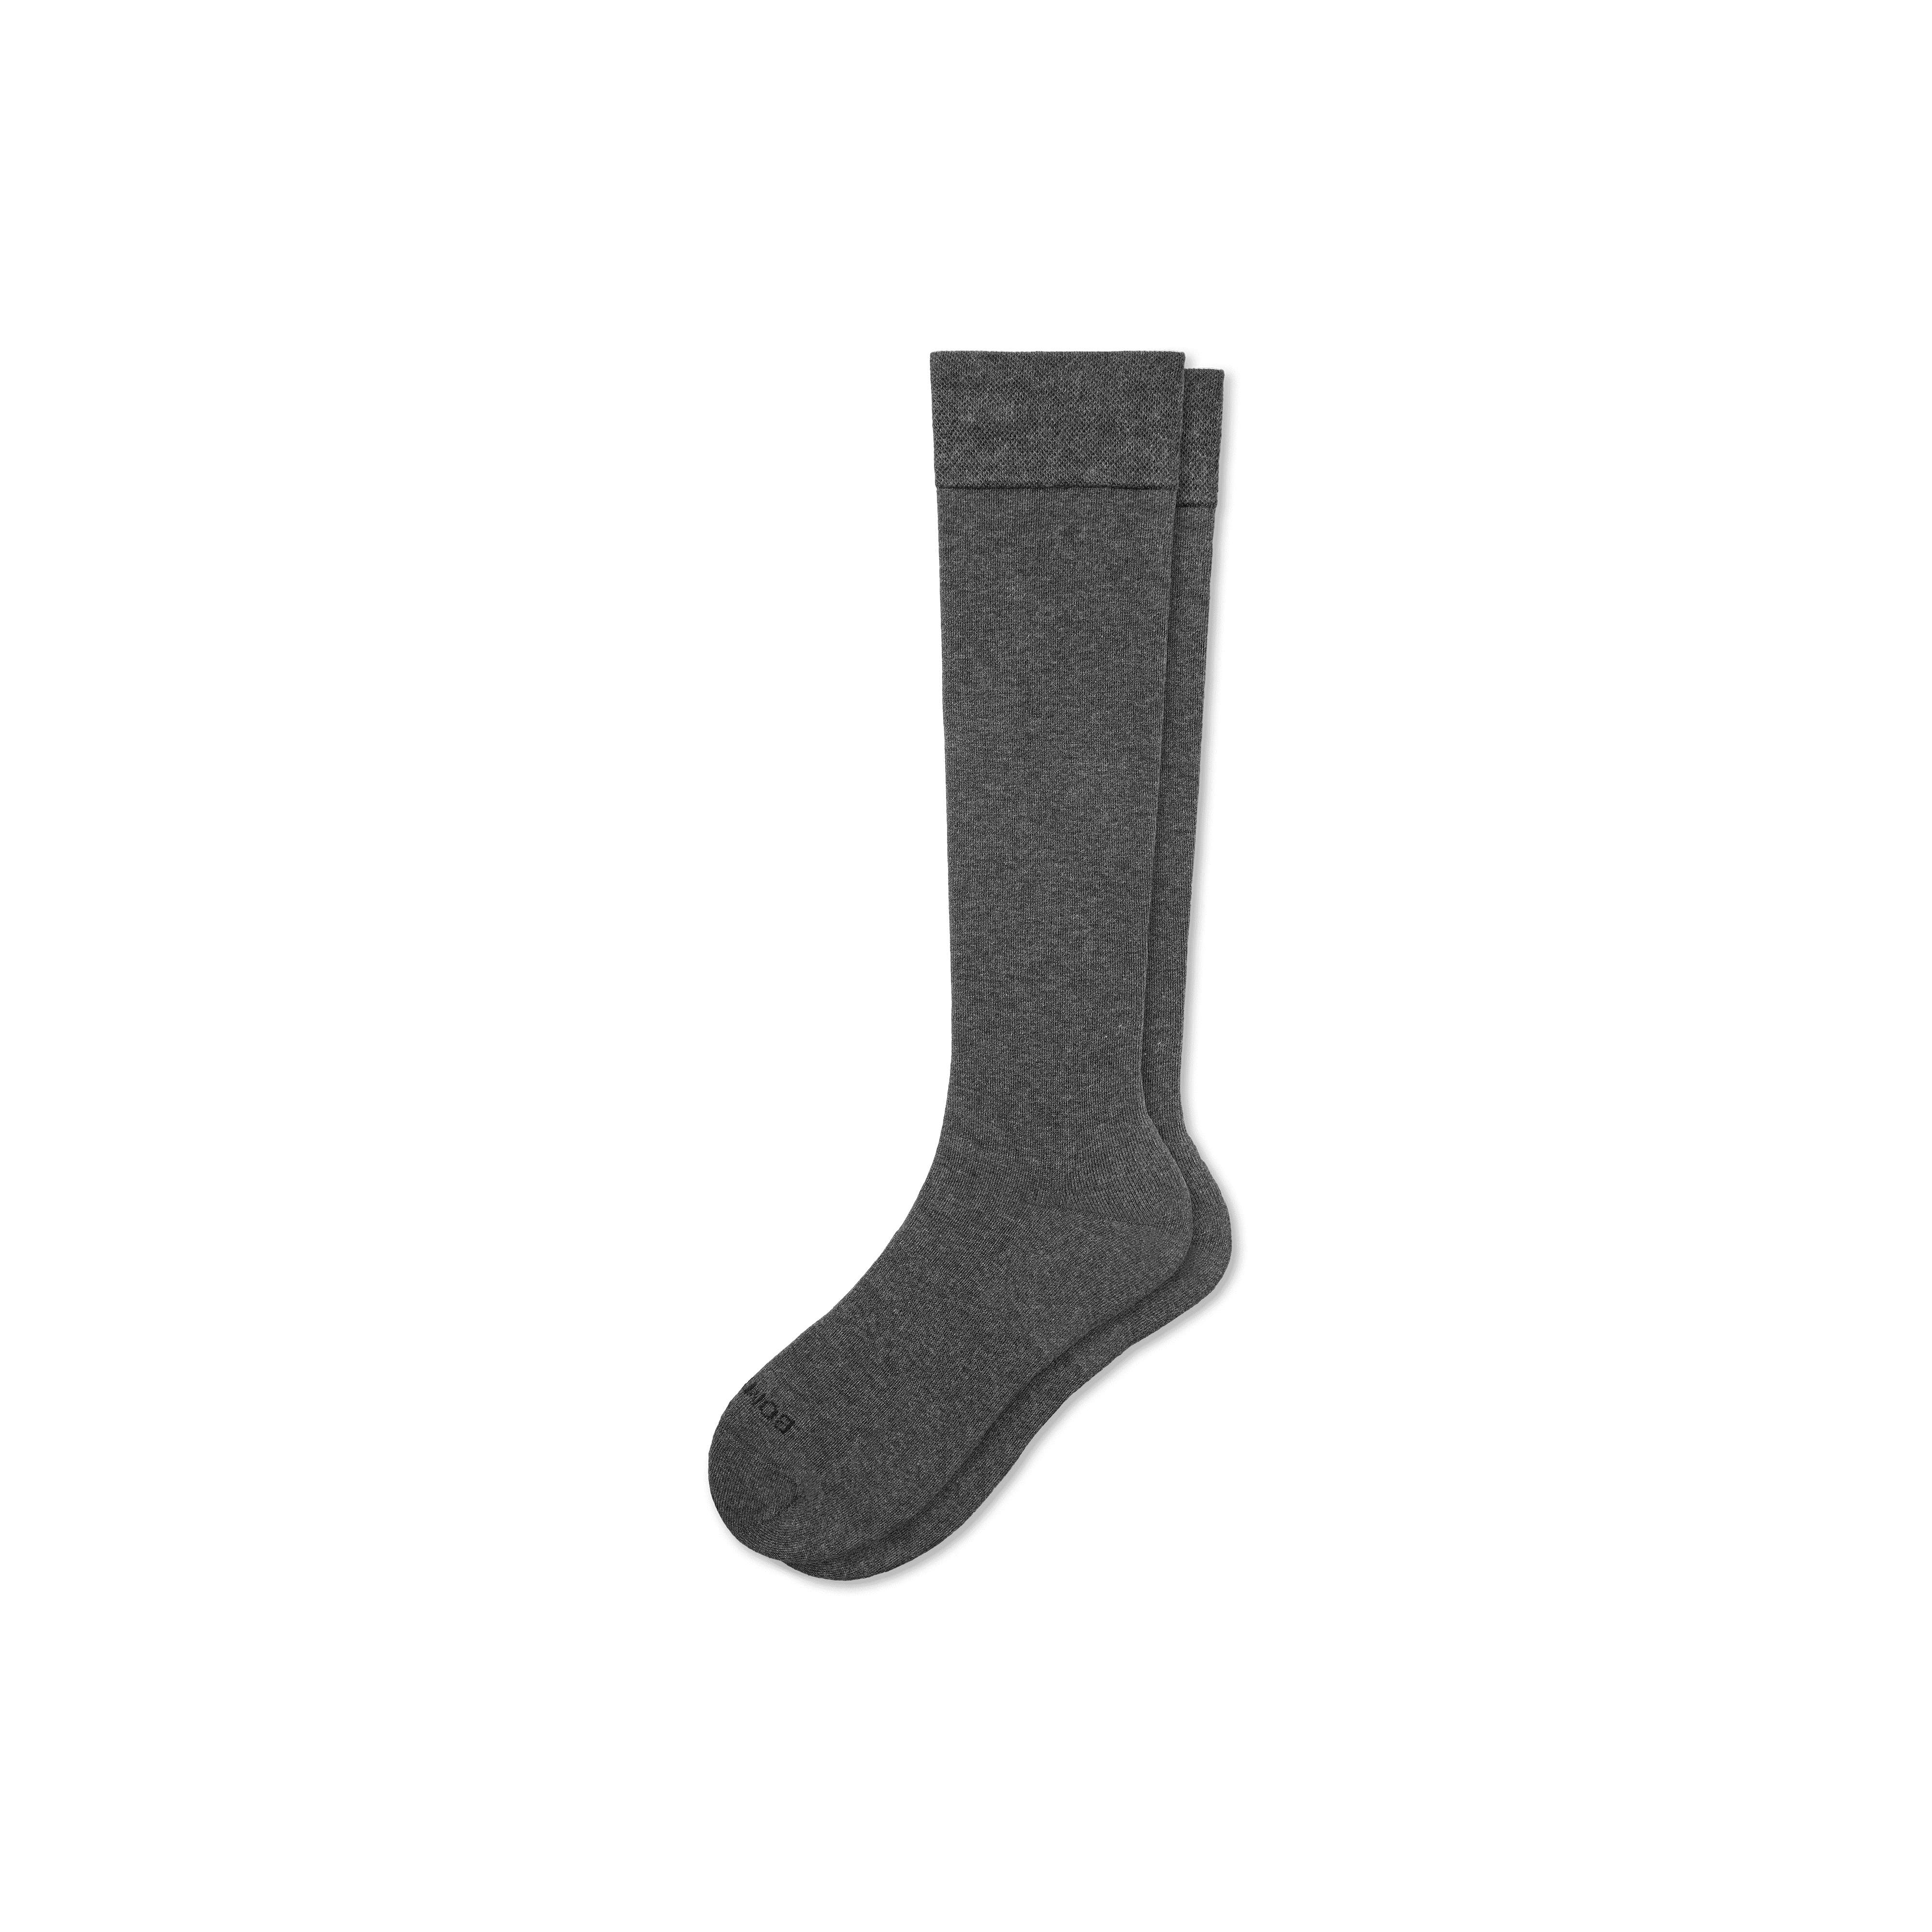 Bombas Dress Knee High Socks In Solid Charcoal